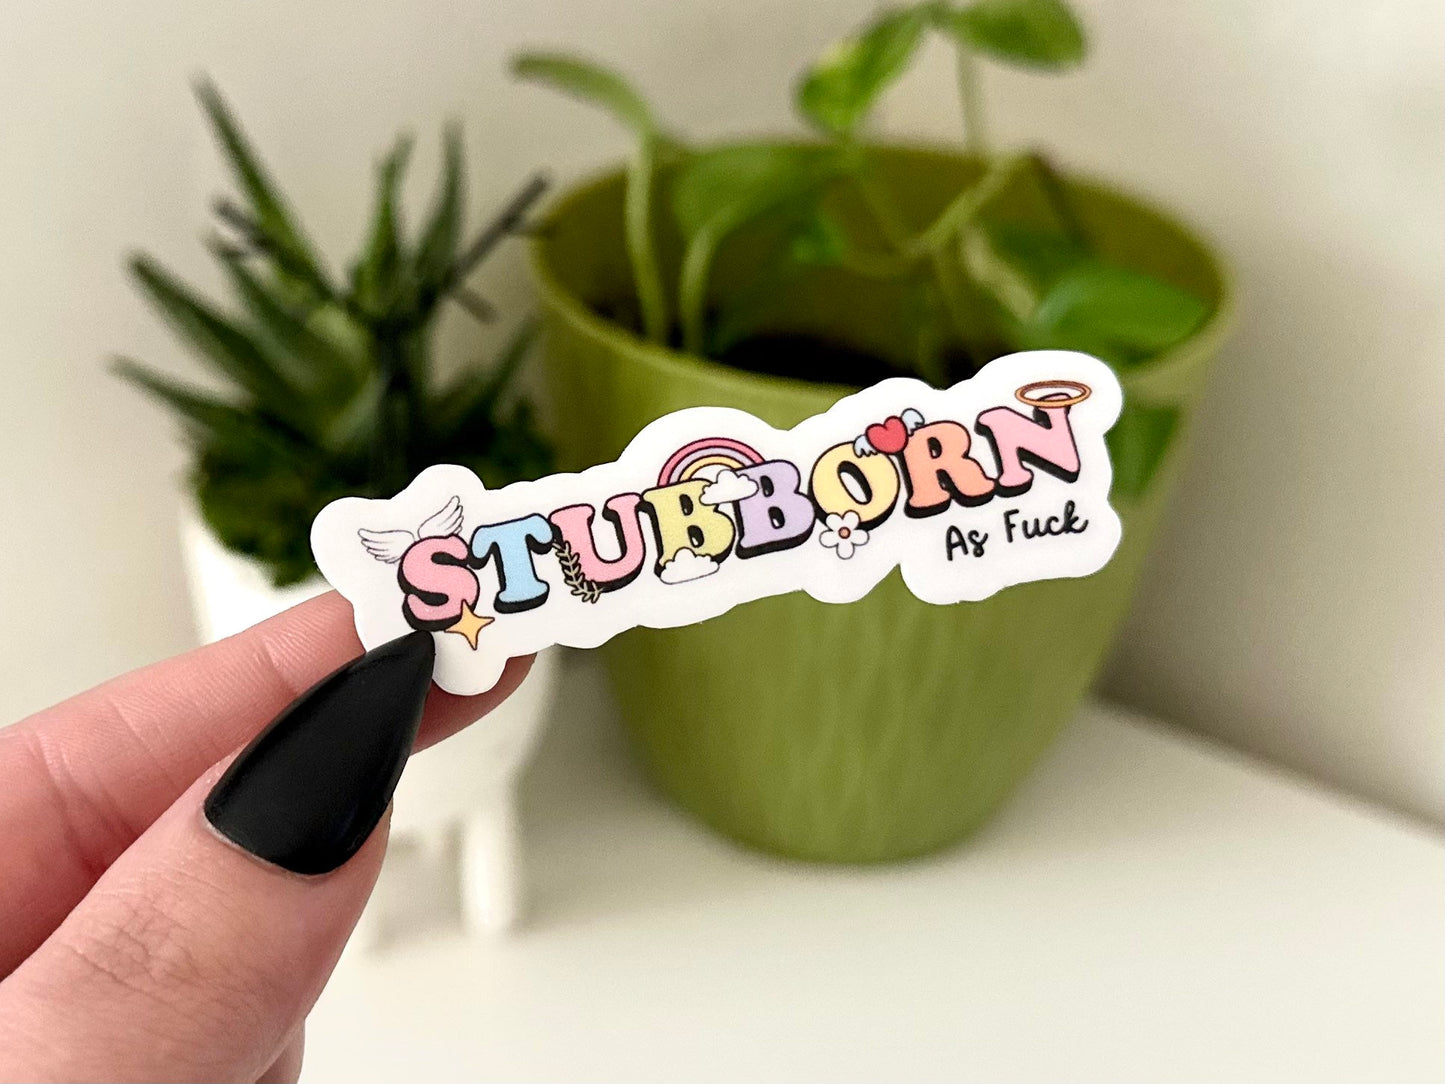 Stubborn AF Waterproof Sticker, Mental Health Gifts, Mental Health Matters, Gifts for Therapists, Therapy Art